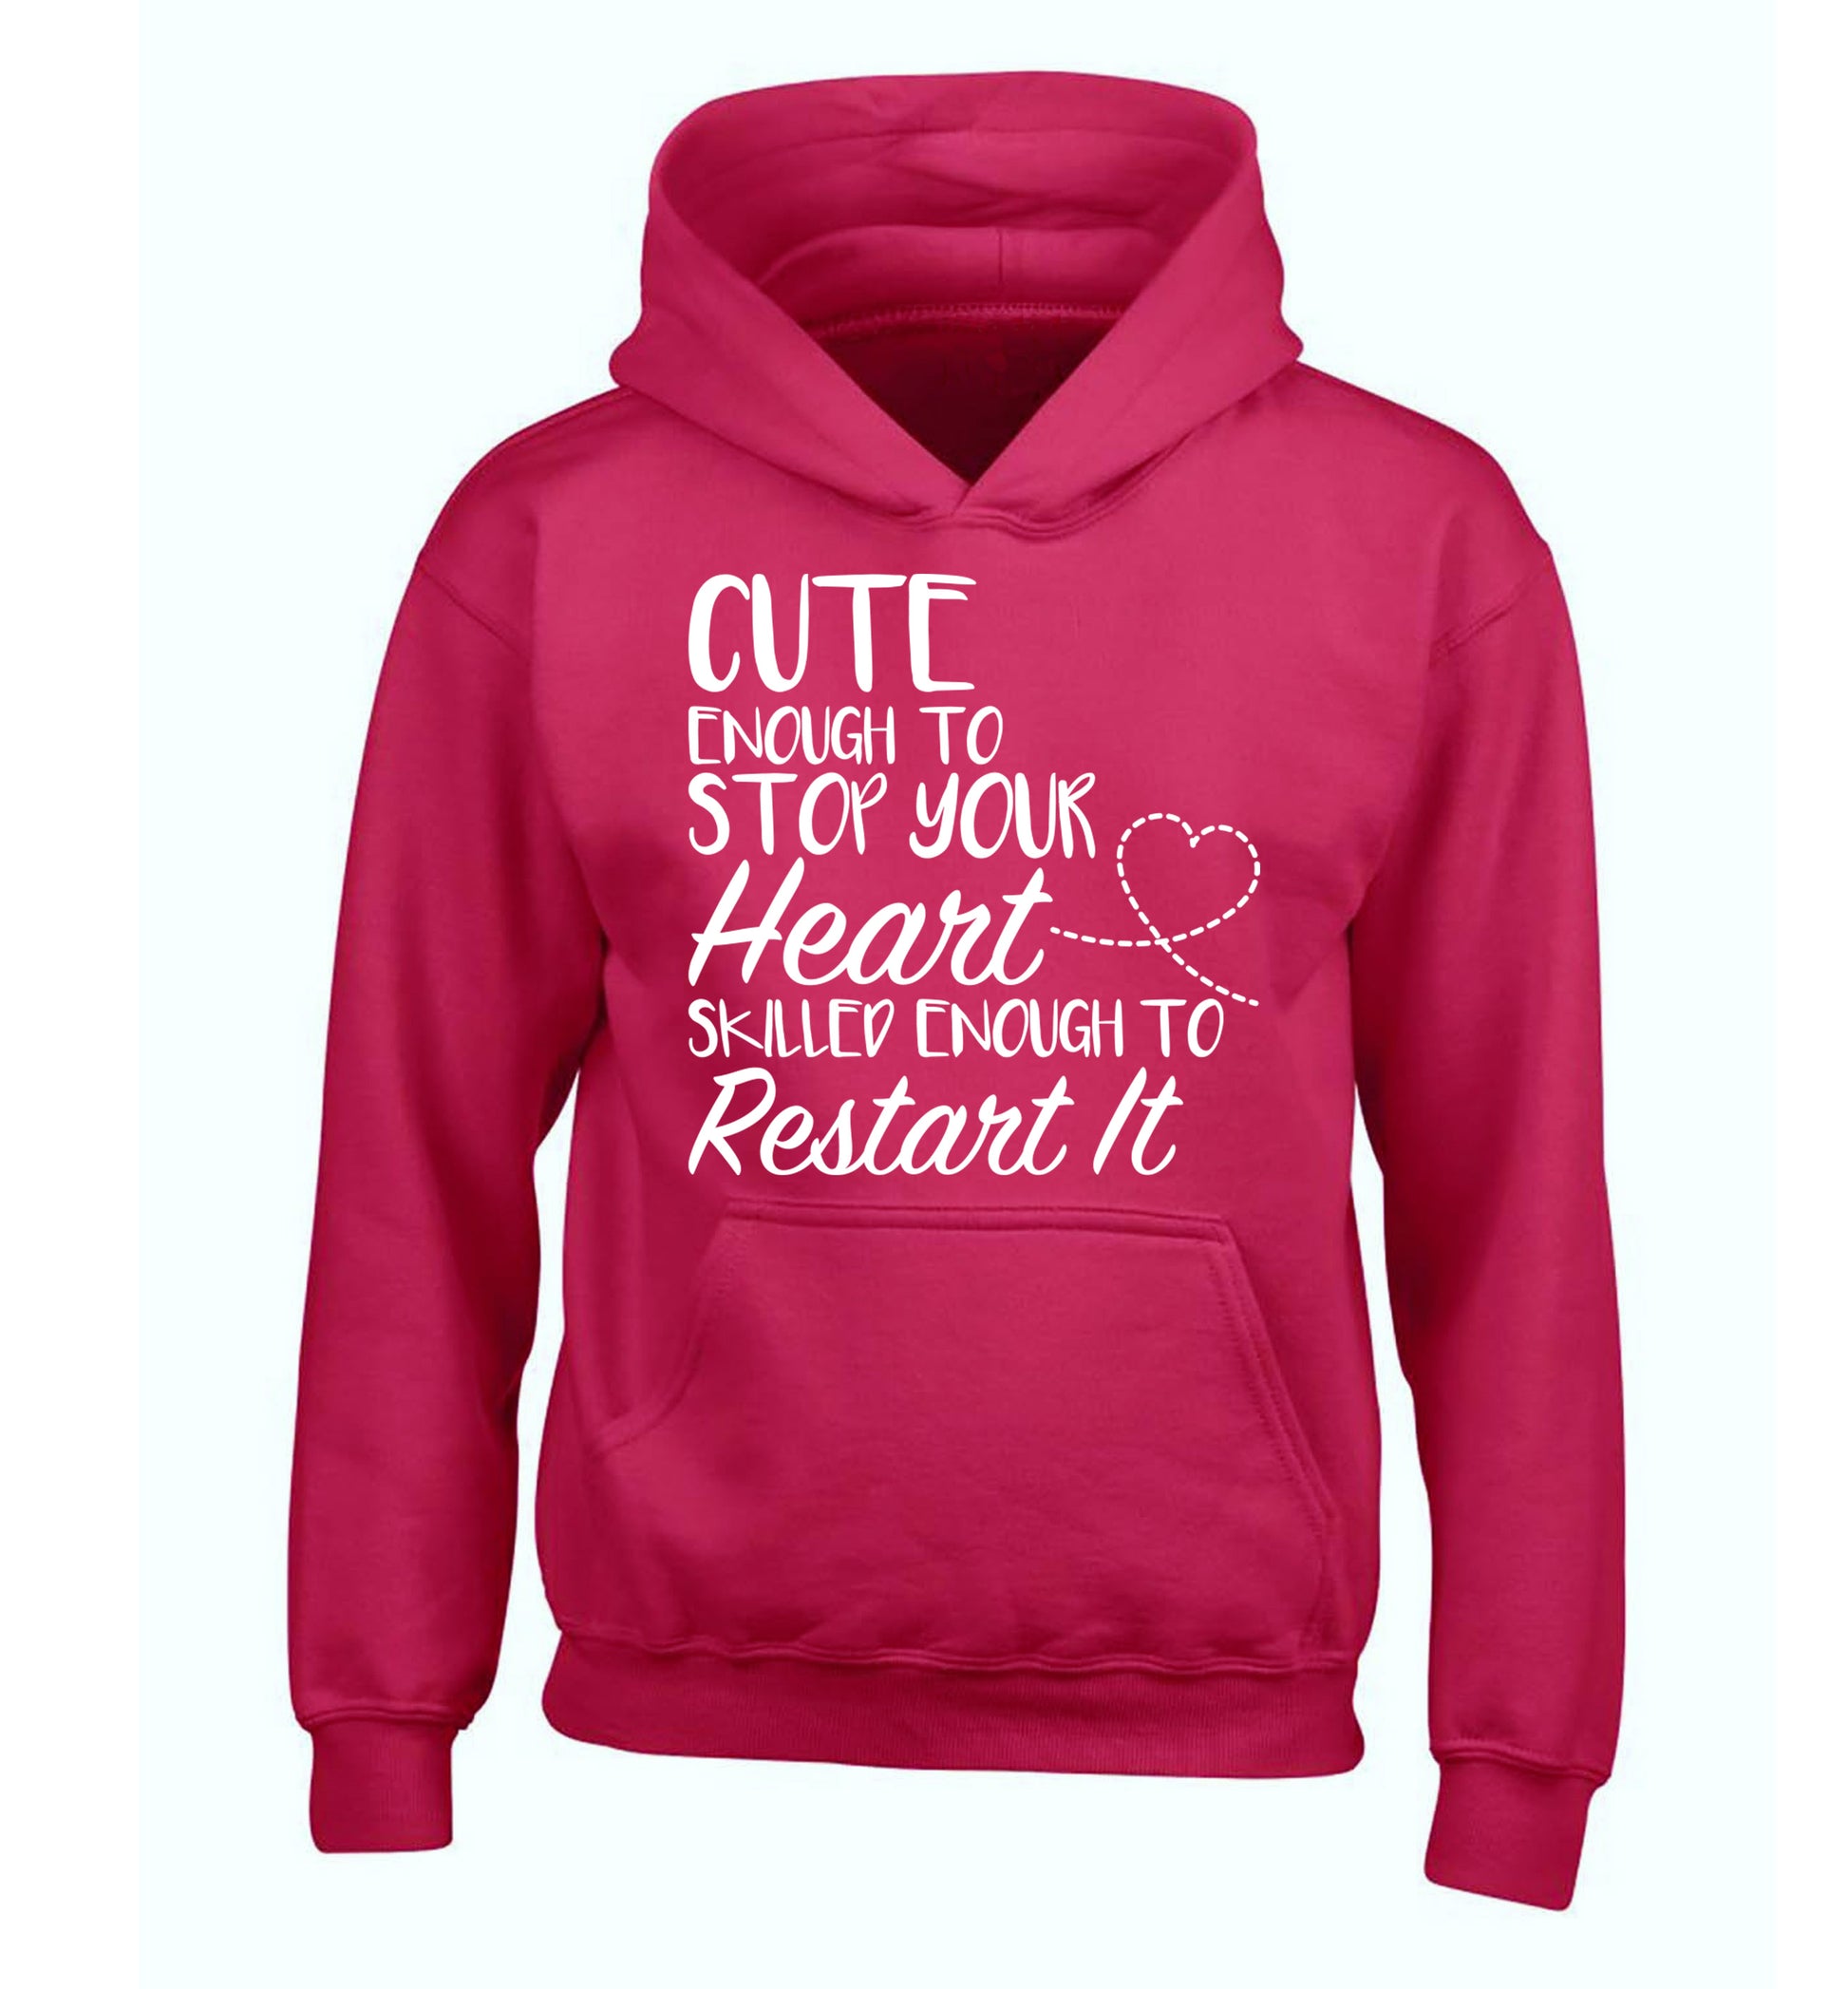 Cute enough to stop your heart skilled enough to restart it children's pink hoodie 12-13 Years